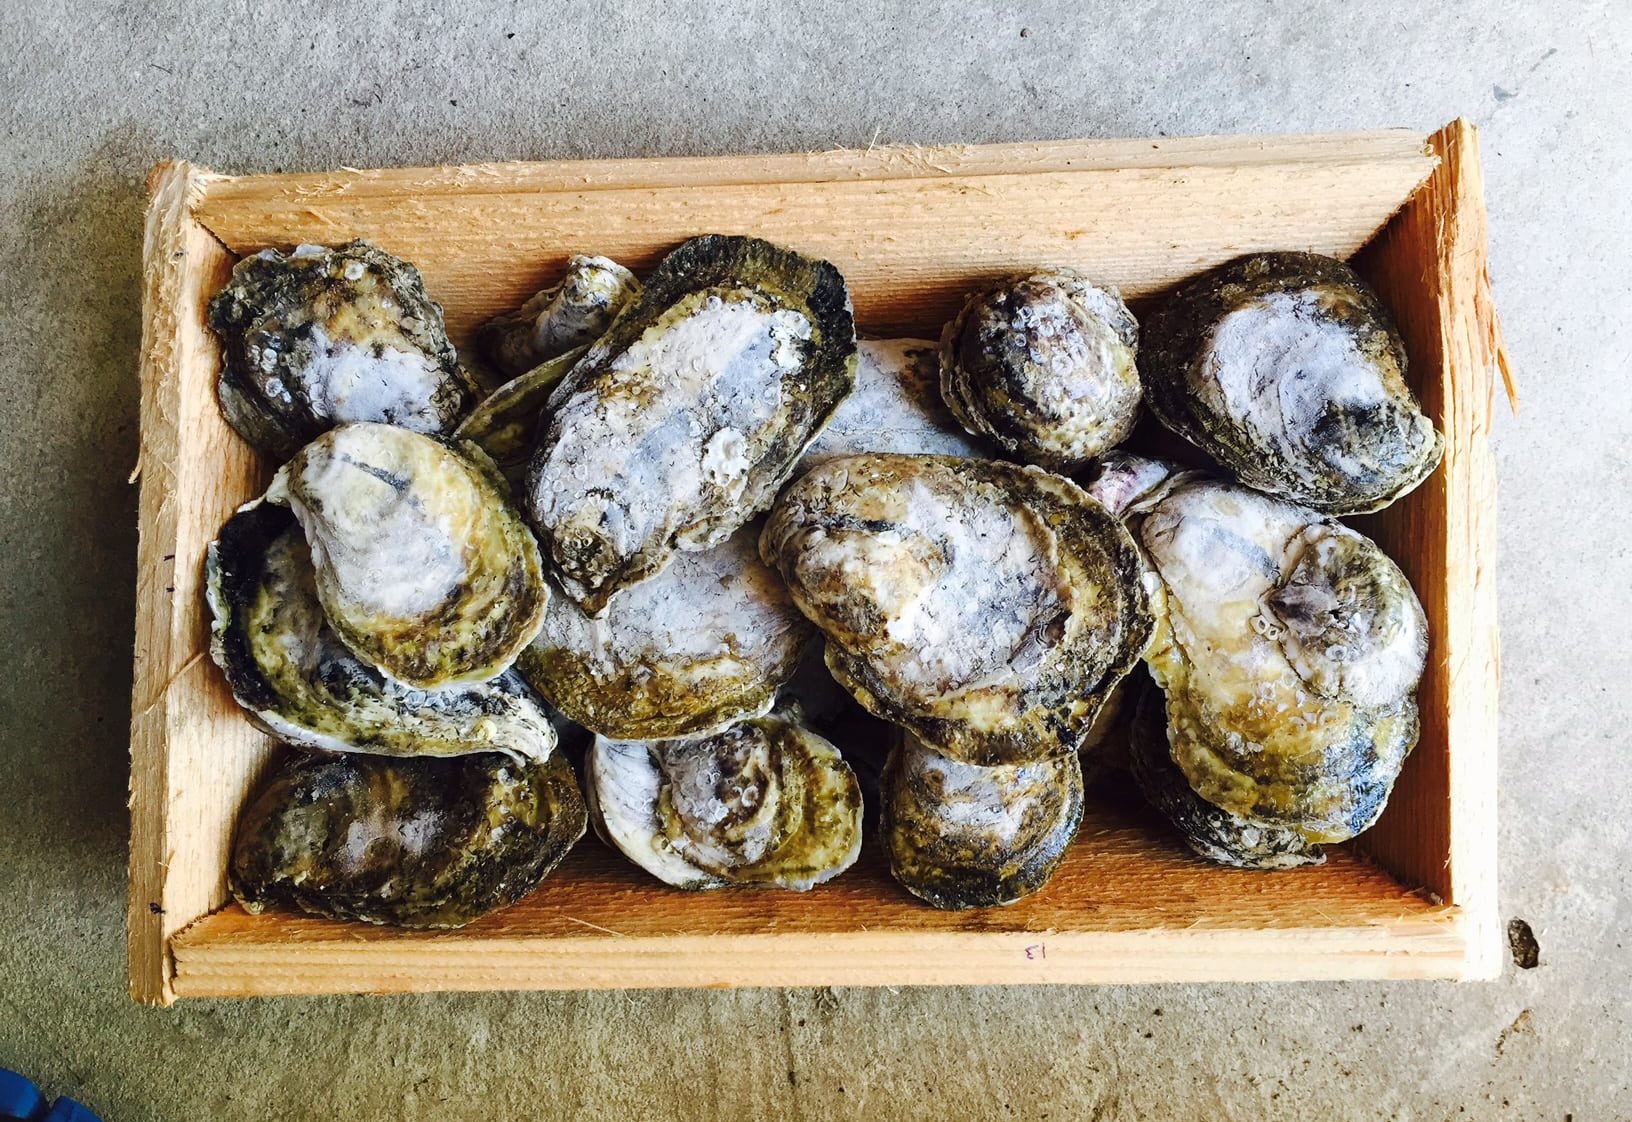 Raw oysters in wooden crate